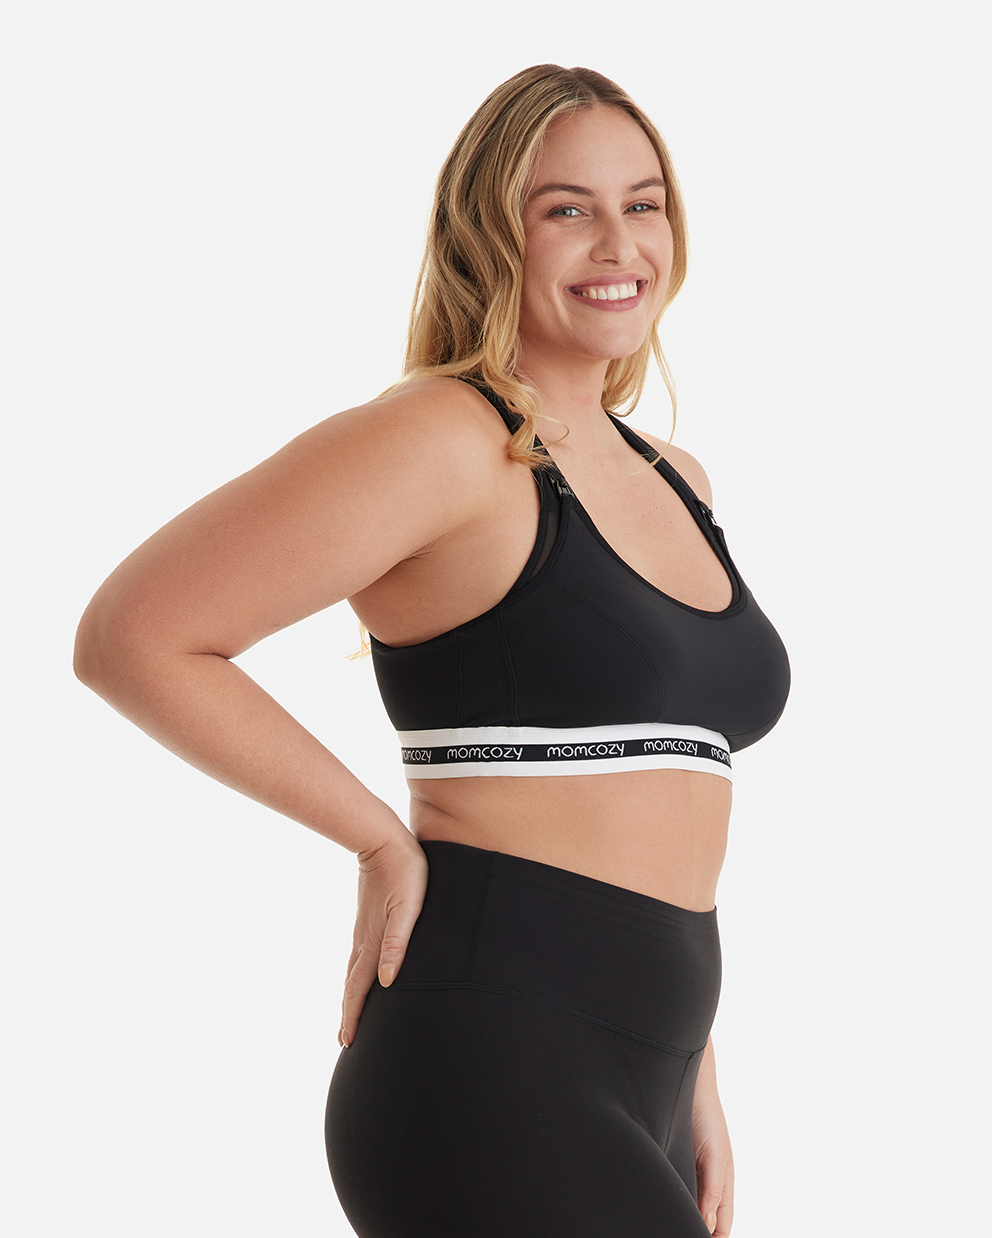 Active - Heavy Duty Nursing & Sports Bra More Supportive